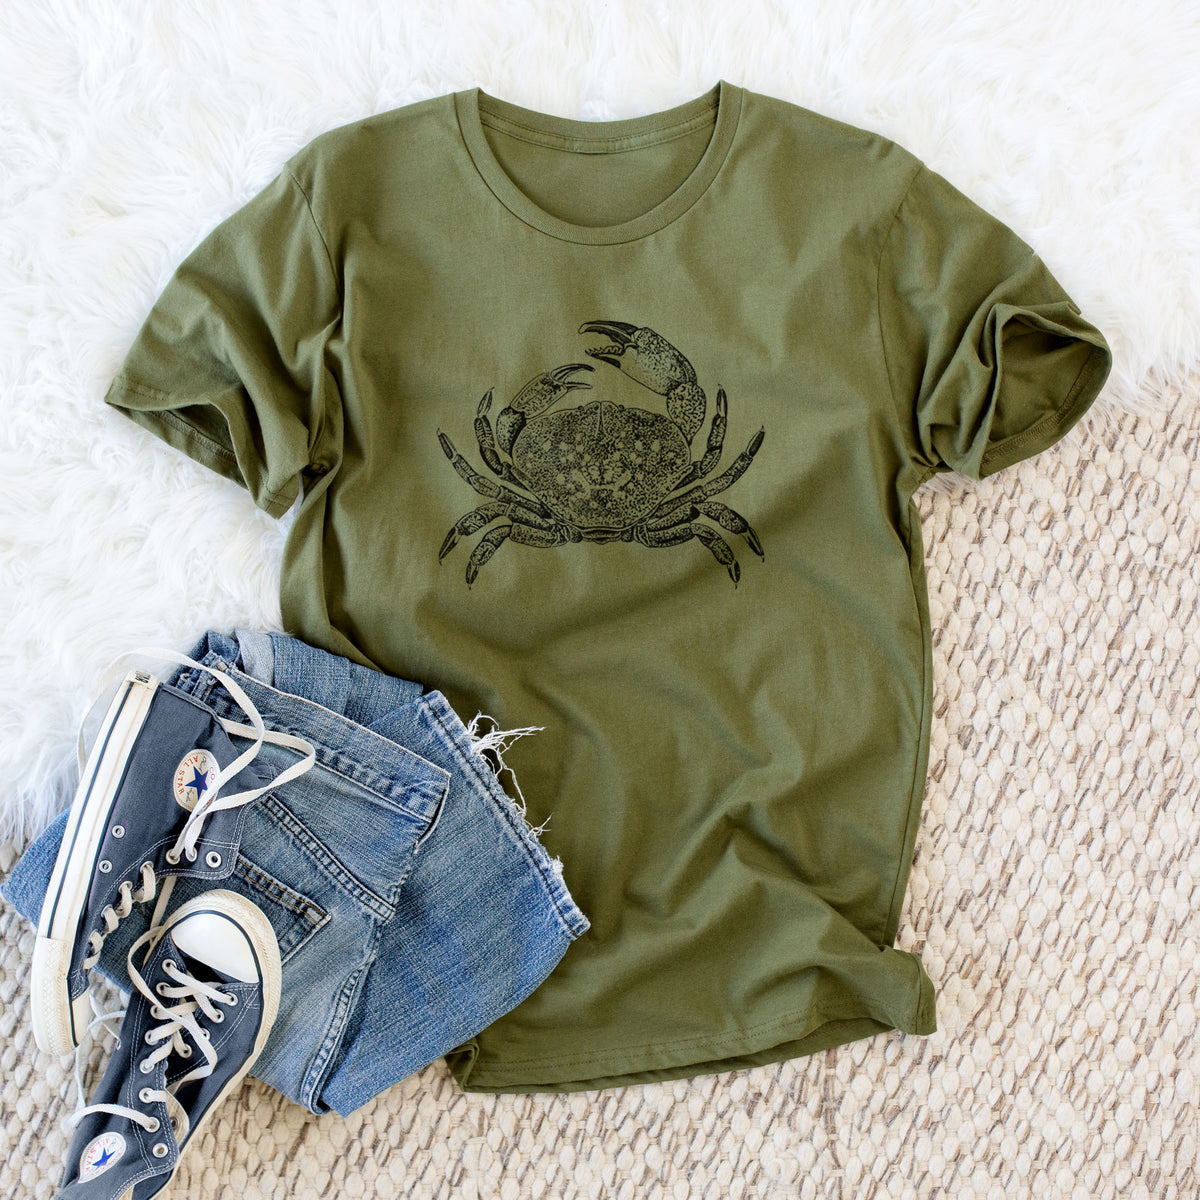 Dungeness Crab - Unisex Crewneck - Made in USA - 100% Organic Cotton